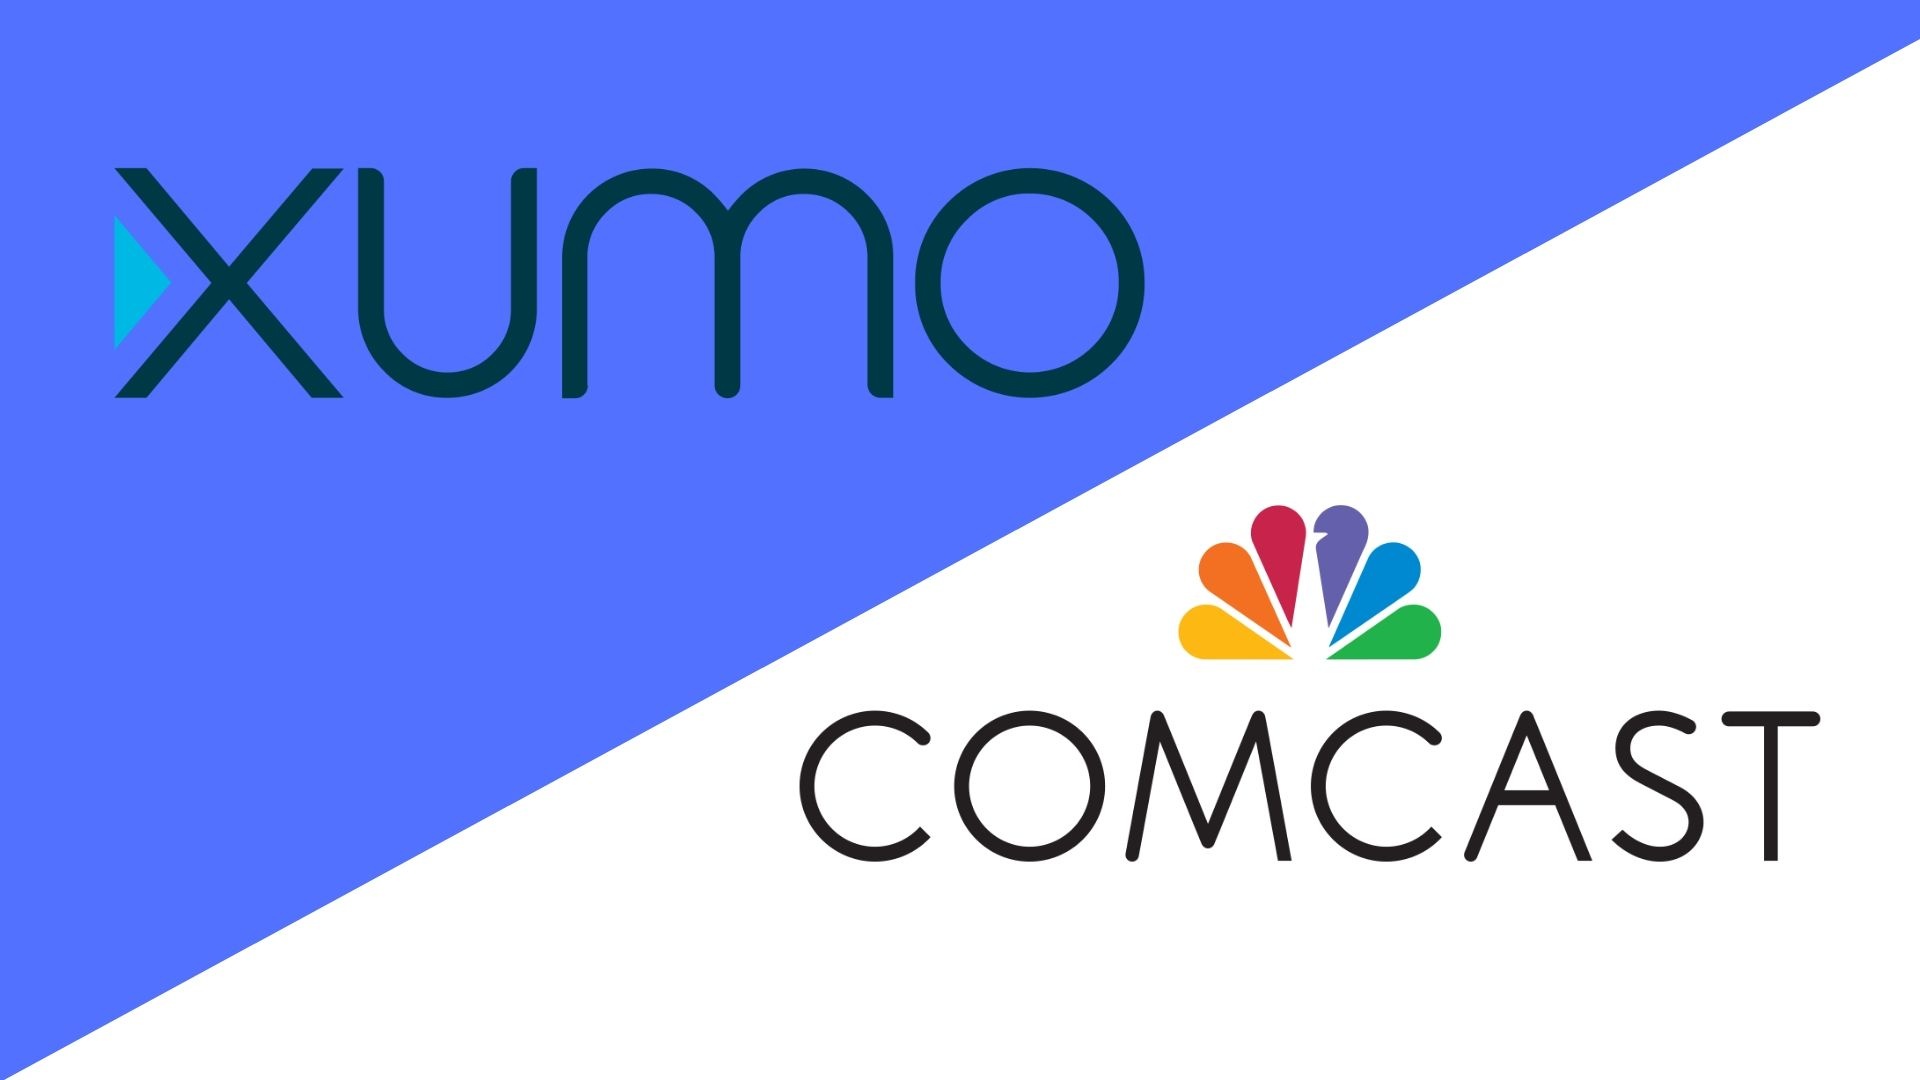 NBCUniversal, Comcast acquires Xumo, Opens new local ads business, 1920x1080 Full HD Desktop